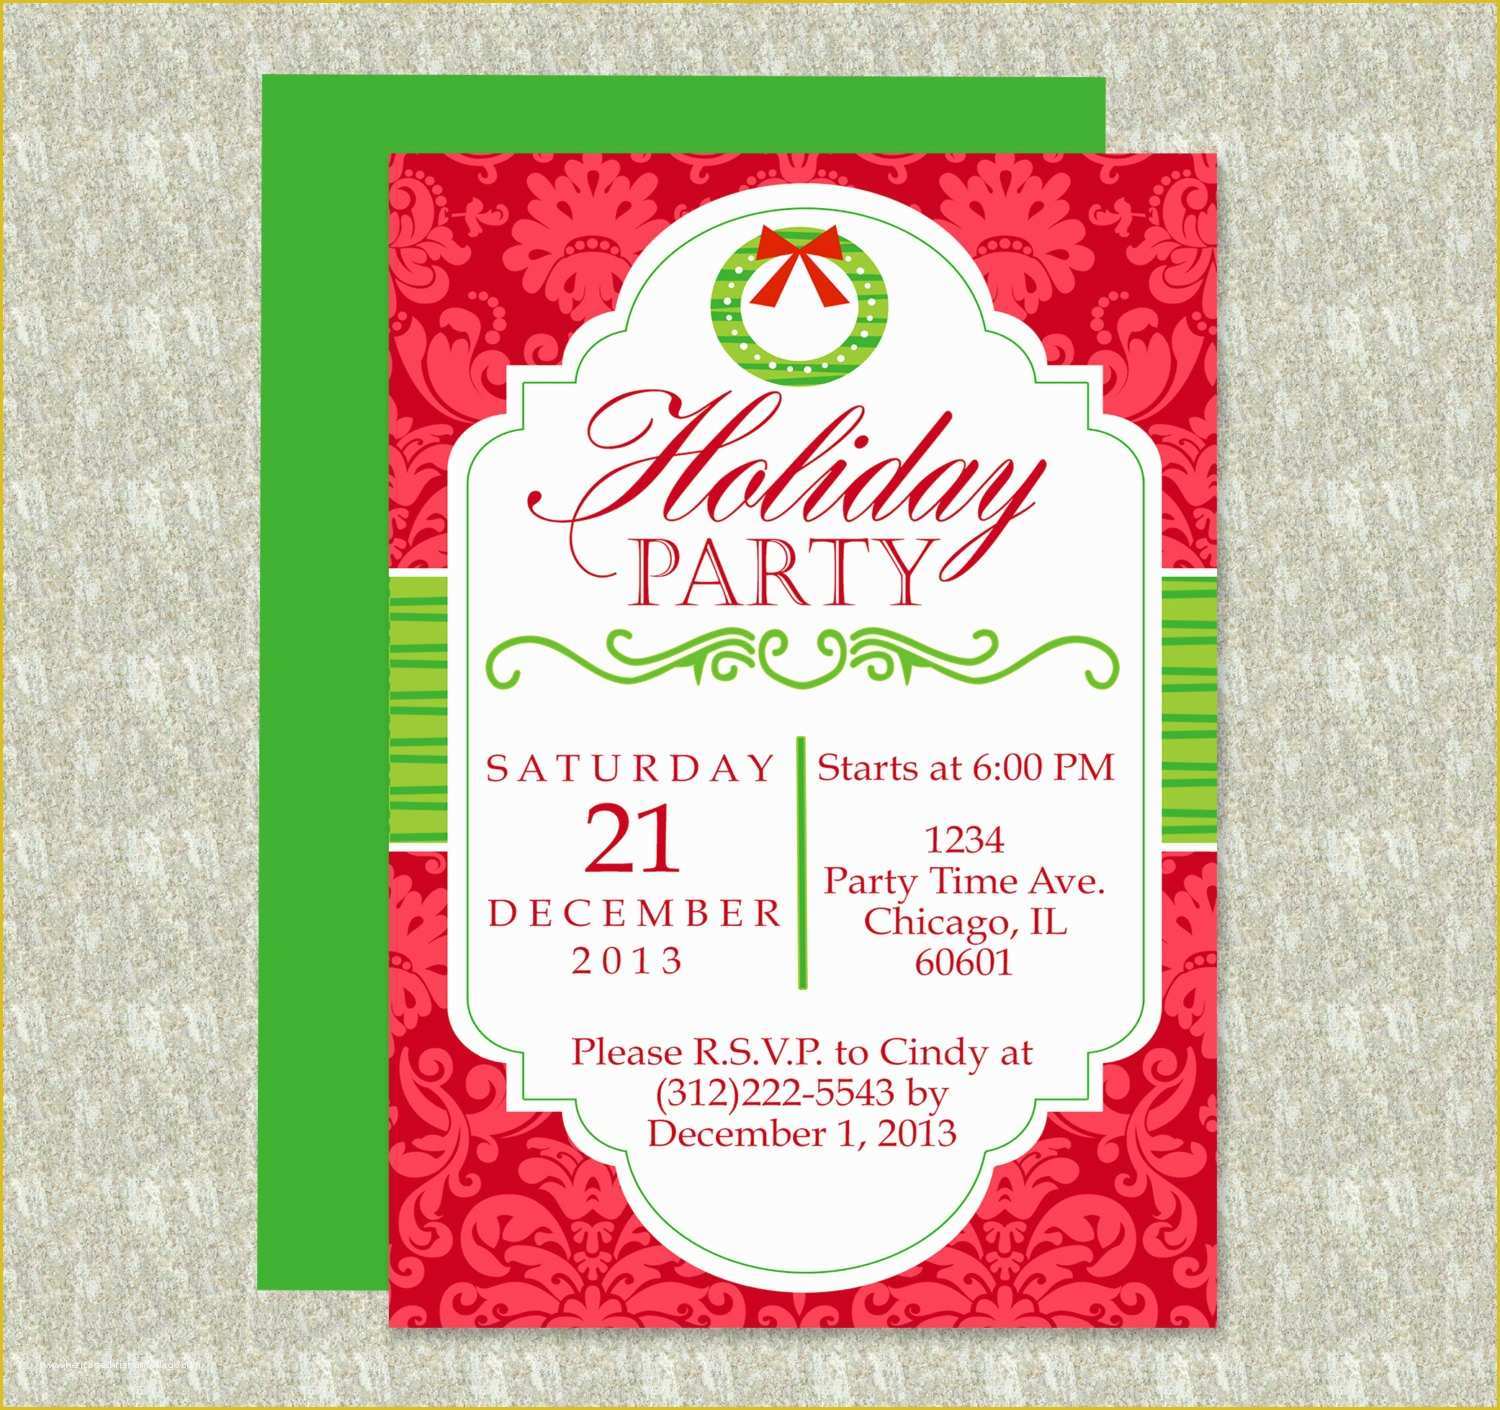 Holiday Party Flyer Template Free Of Holiday Party Invitation Editable Template Microsoft Word